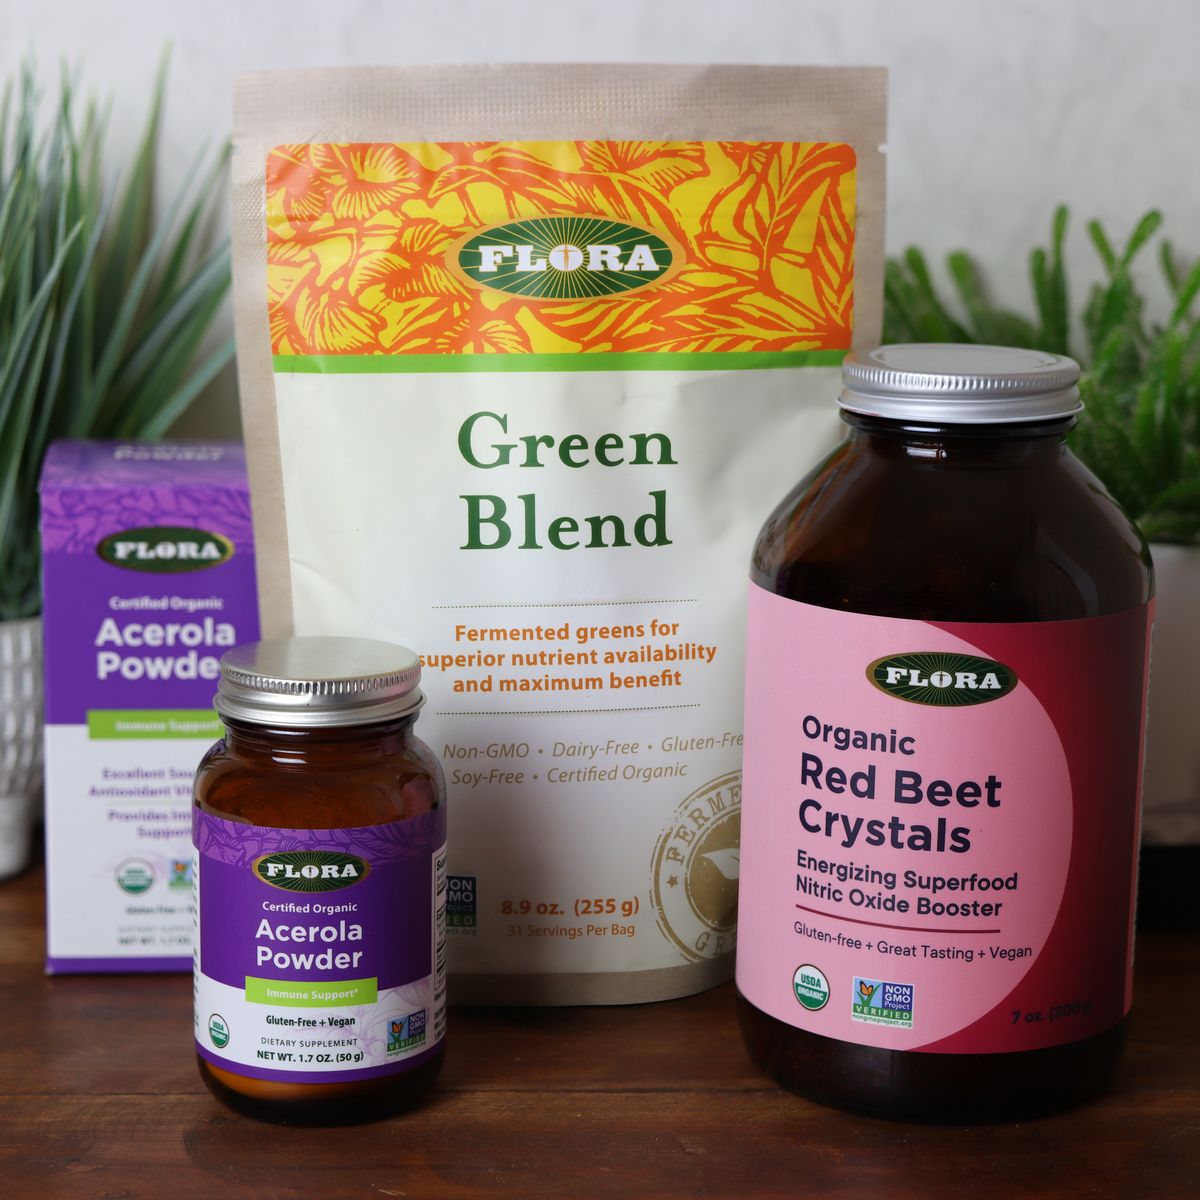 Green blend, red beet crystals, and acerola powder from FloraHealth.com